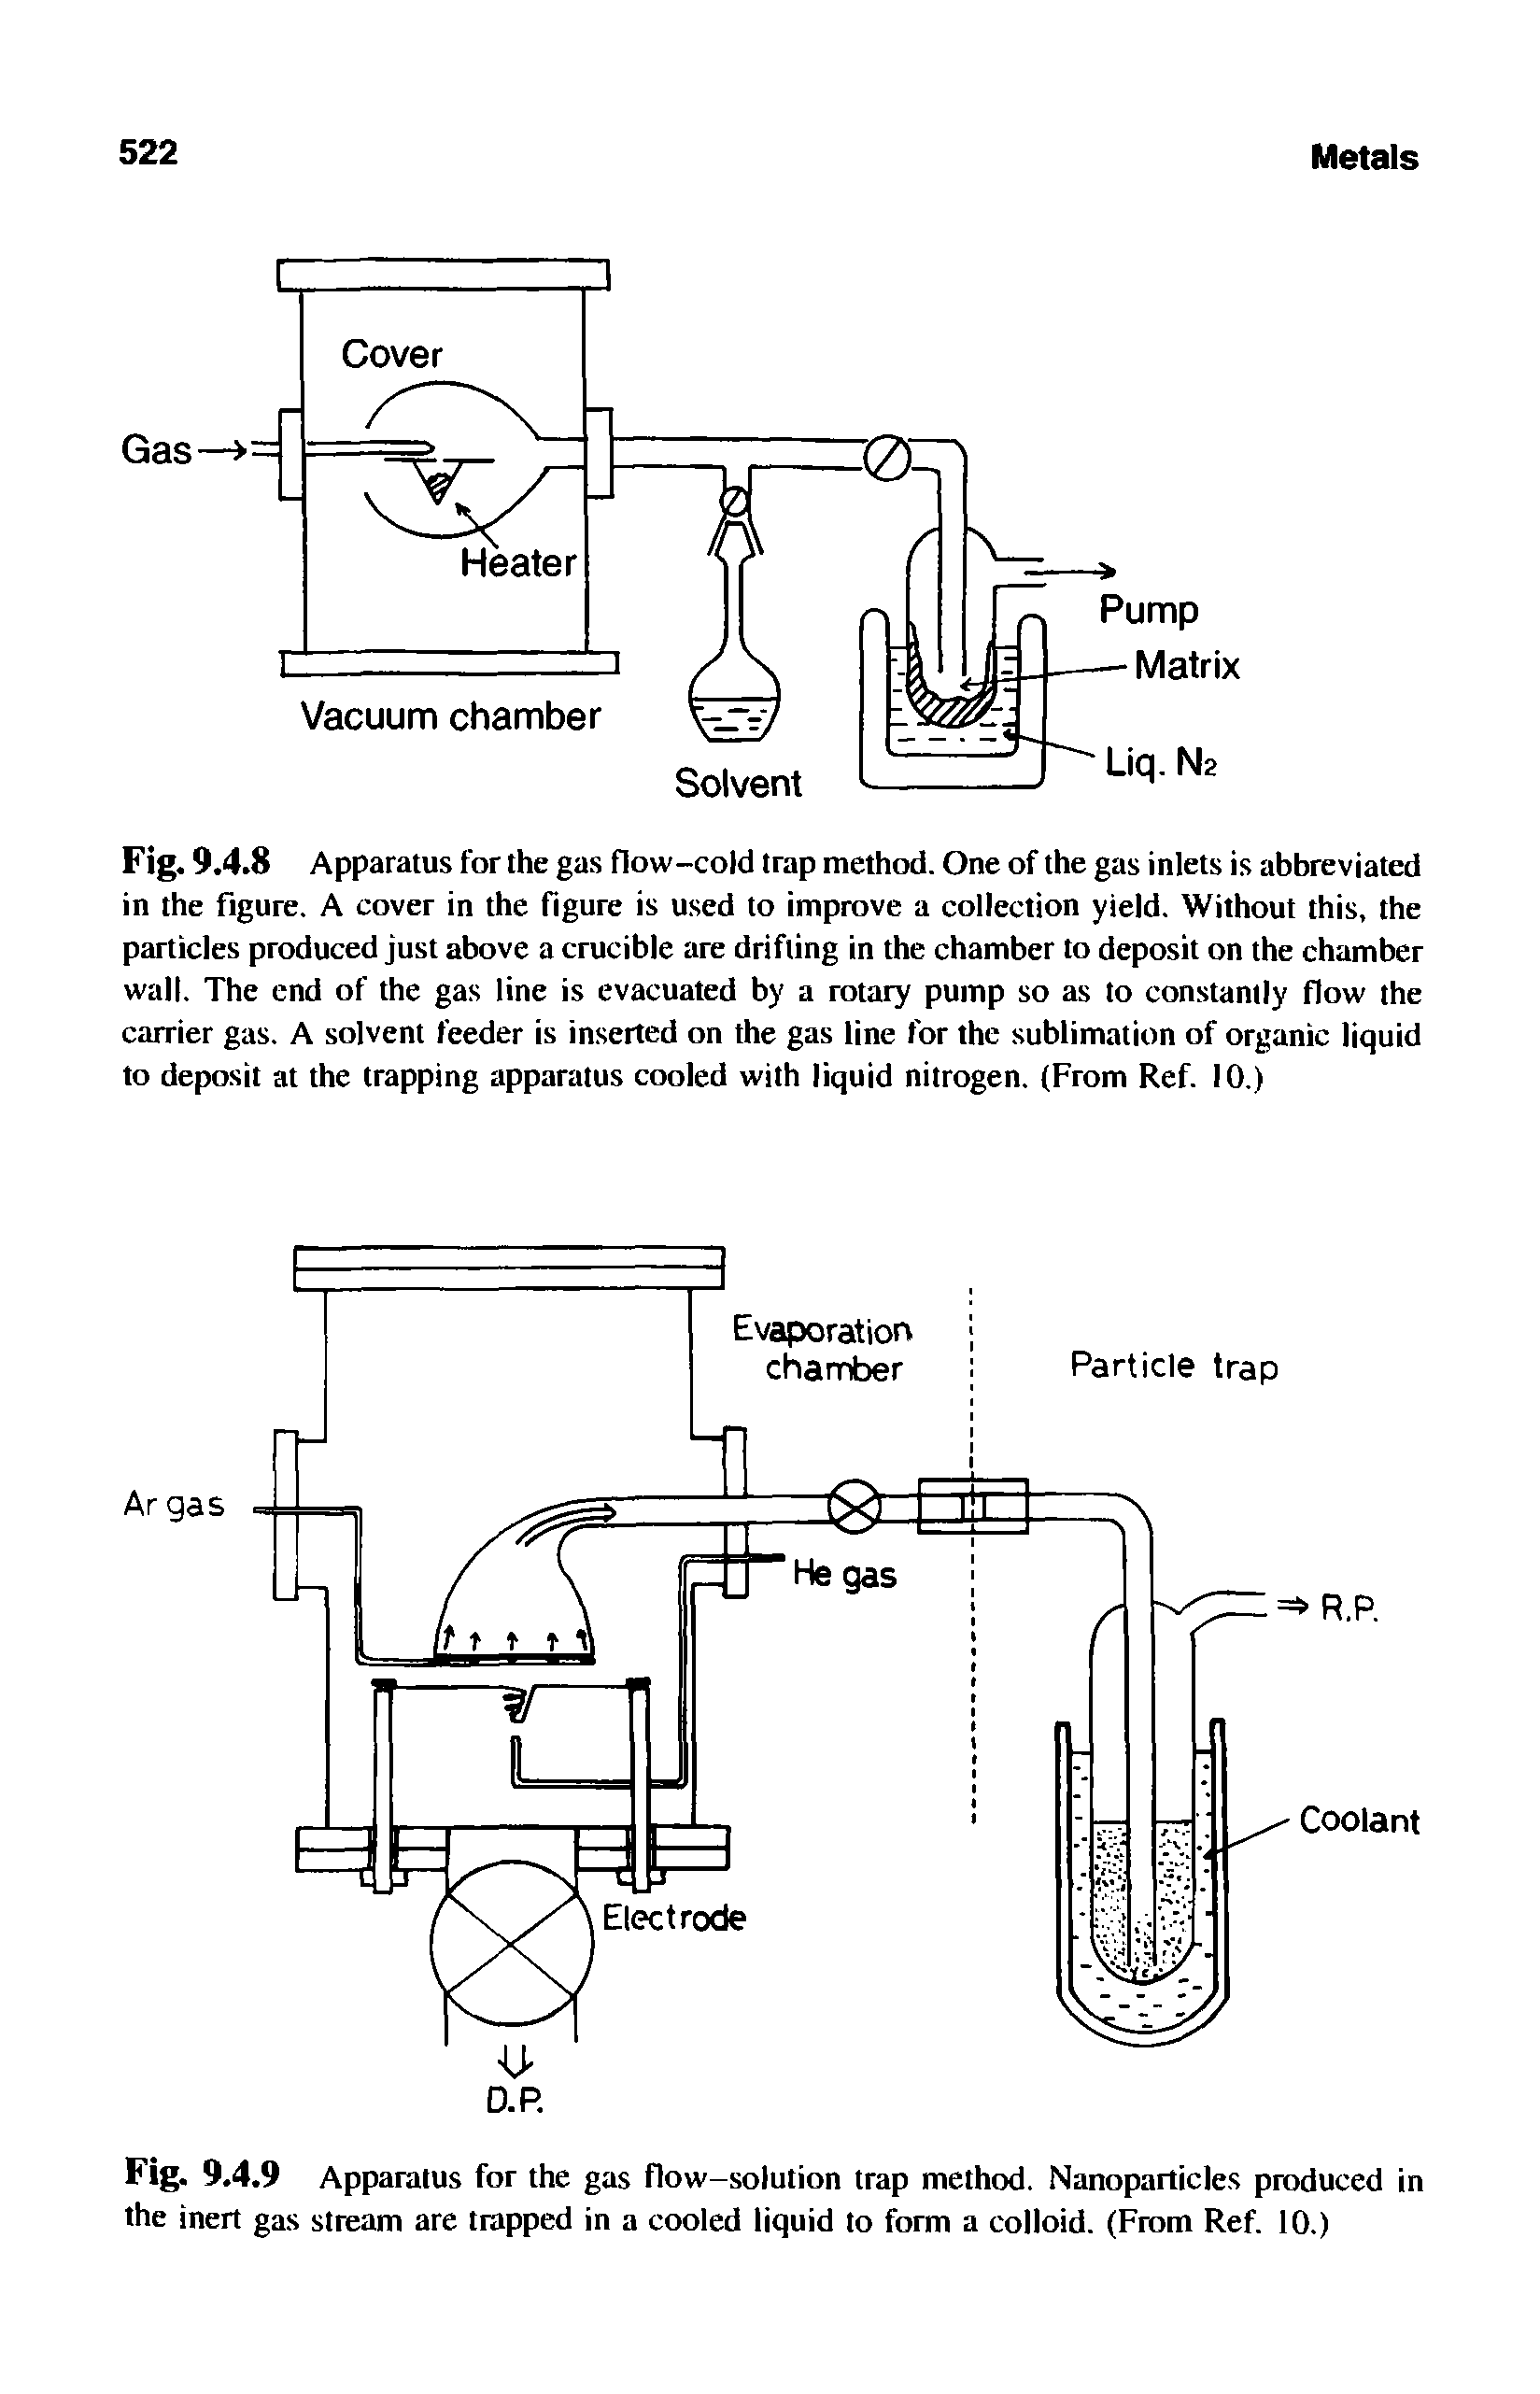 Fig. 9.4.8 Apparatus for the gas flow-cold trap method. One of the gas inlets is abbreviated in the figure. A cover in the figure is used to improve a collection yield. Without this, the particles produced just above a crucible are drifting in the chamber to deposit on the chamber wall. The end of the gas line is evacuated by a rotary pump so as to constantly flow the carrier gas. A solvent feeder is inserted on the gas line for the sublimation of organic liquid to deposit at the trapping apparatus cooled with liquid nitrogen. (From Ref. 10.)...